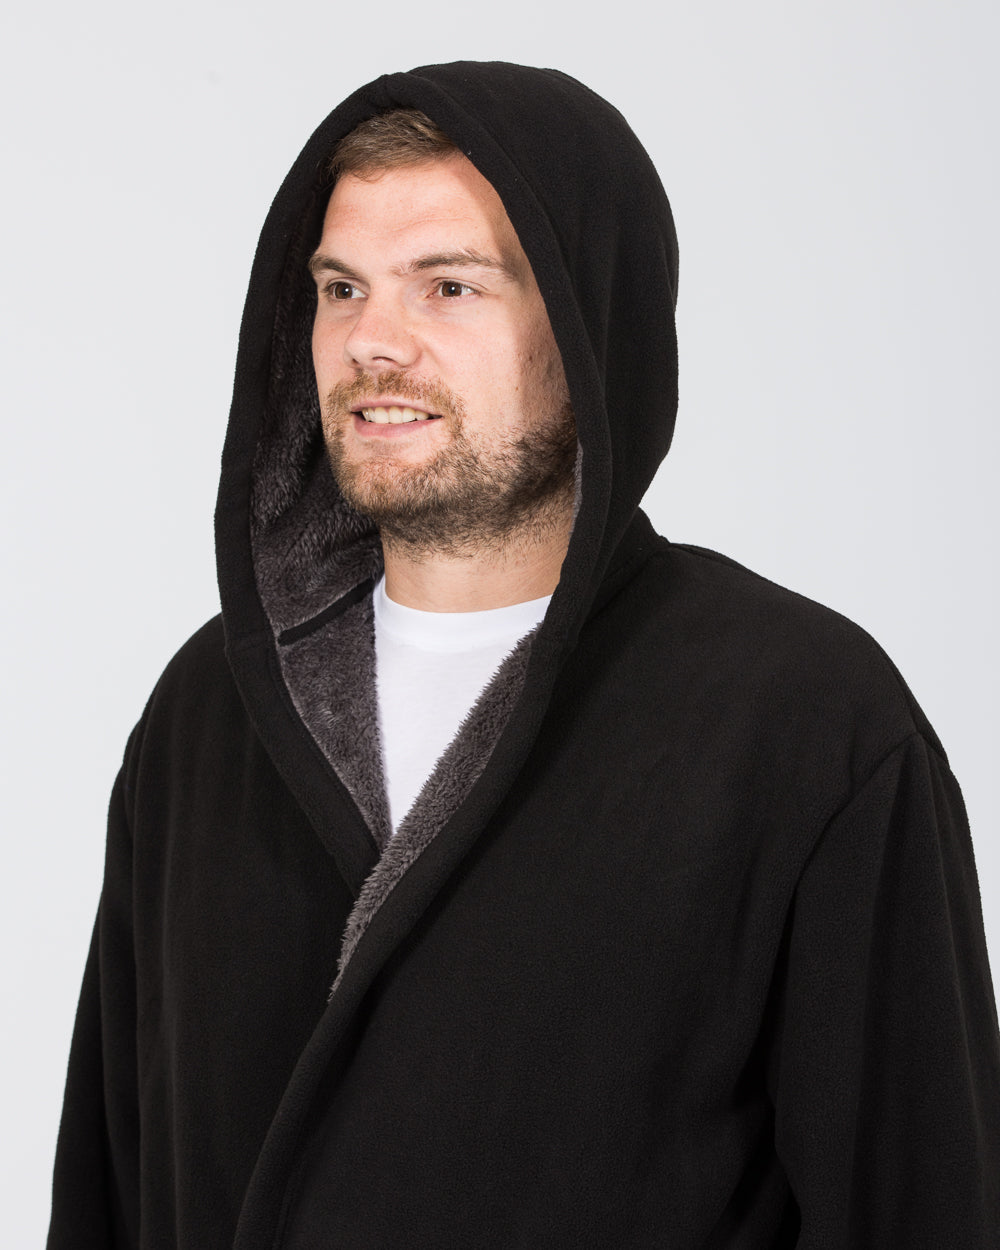 2t Tall Fleece Hooded Dressing Gown (black/charcoal)